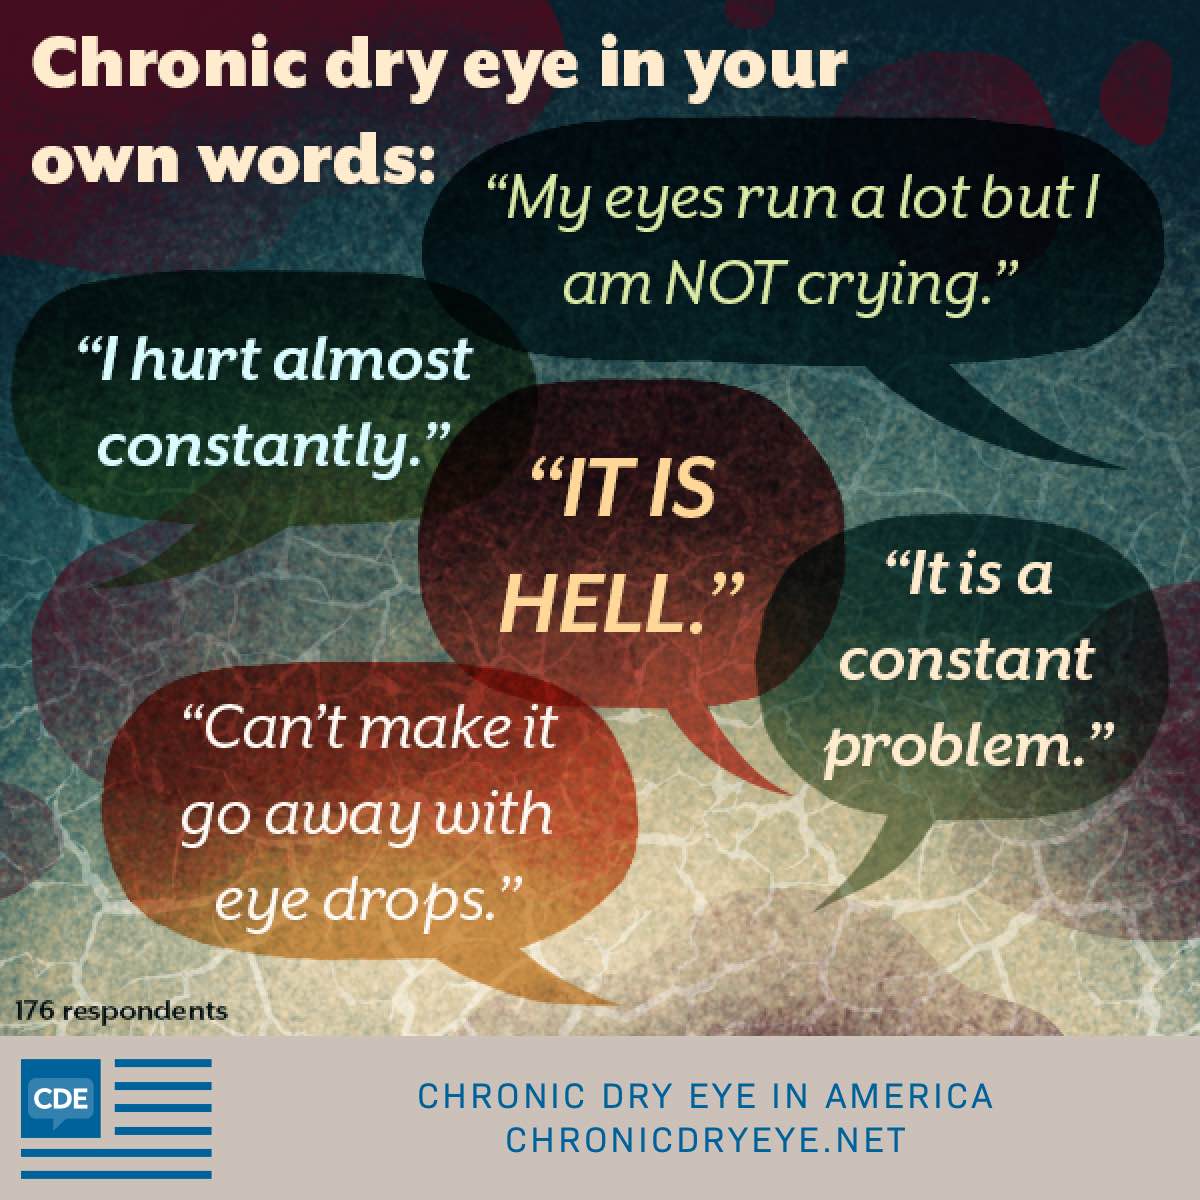 patients describe life with chronic dry eye in their own words